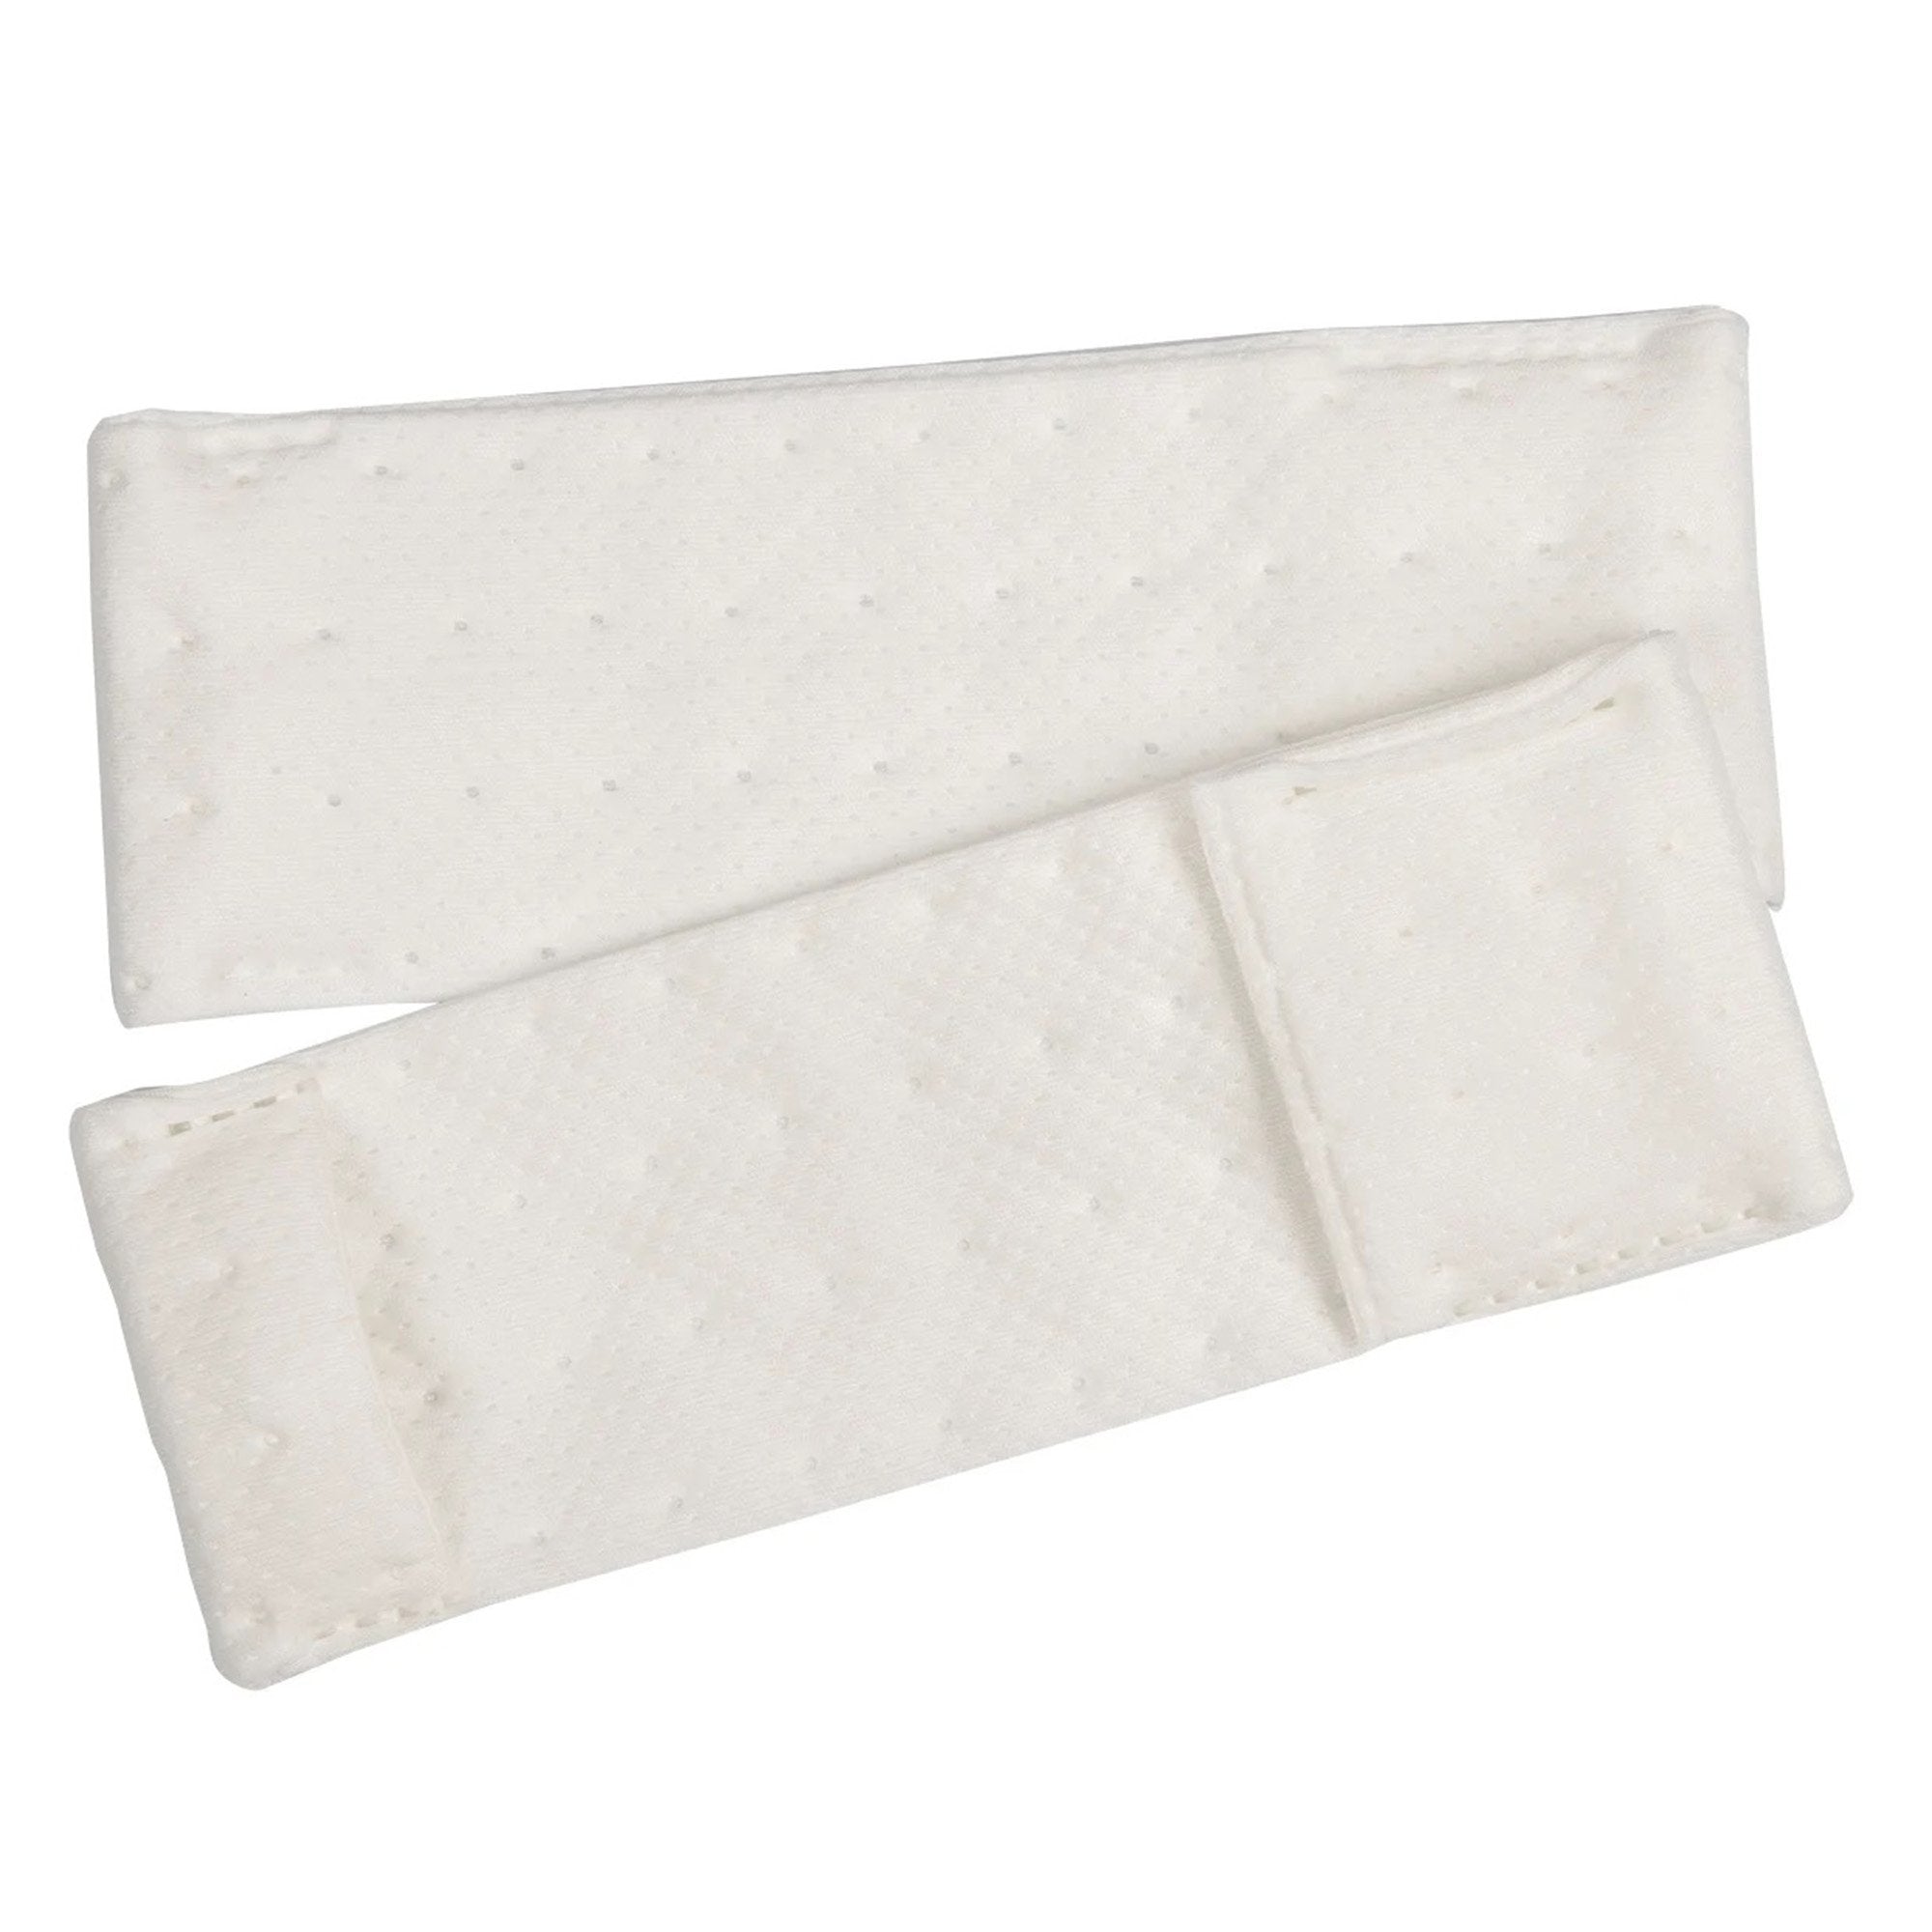 EasyReach? Dry Cleaning Pad